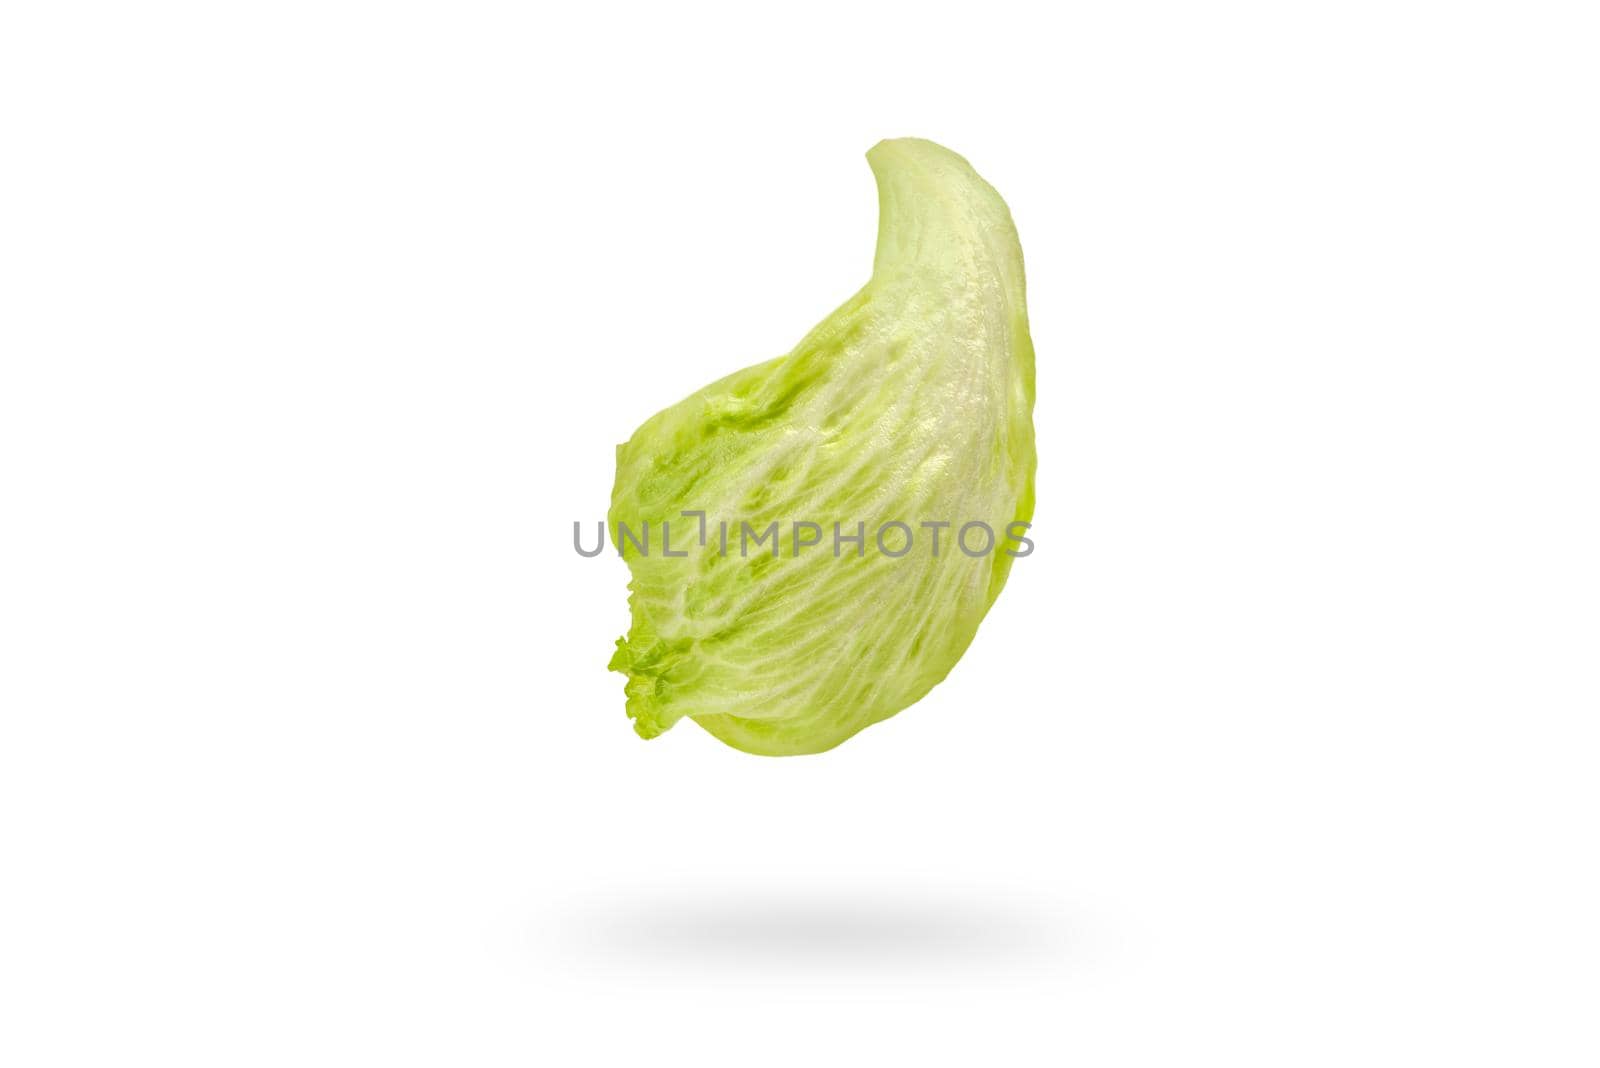 Iceberg lettuce green leaves isolated on white background. Fresh lettuce leaf drops with shadow.Ingredients for hamburgers.